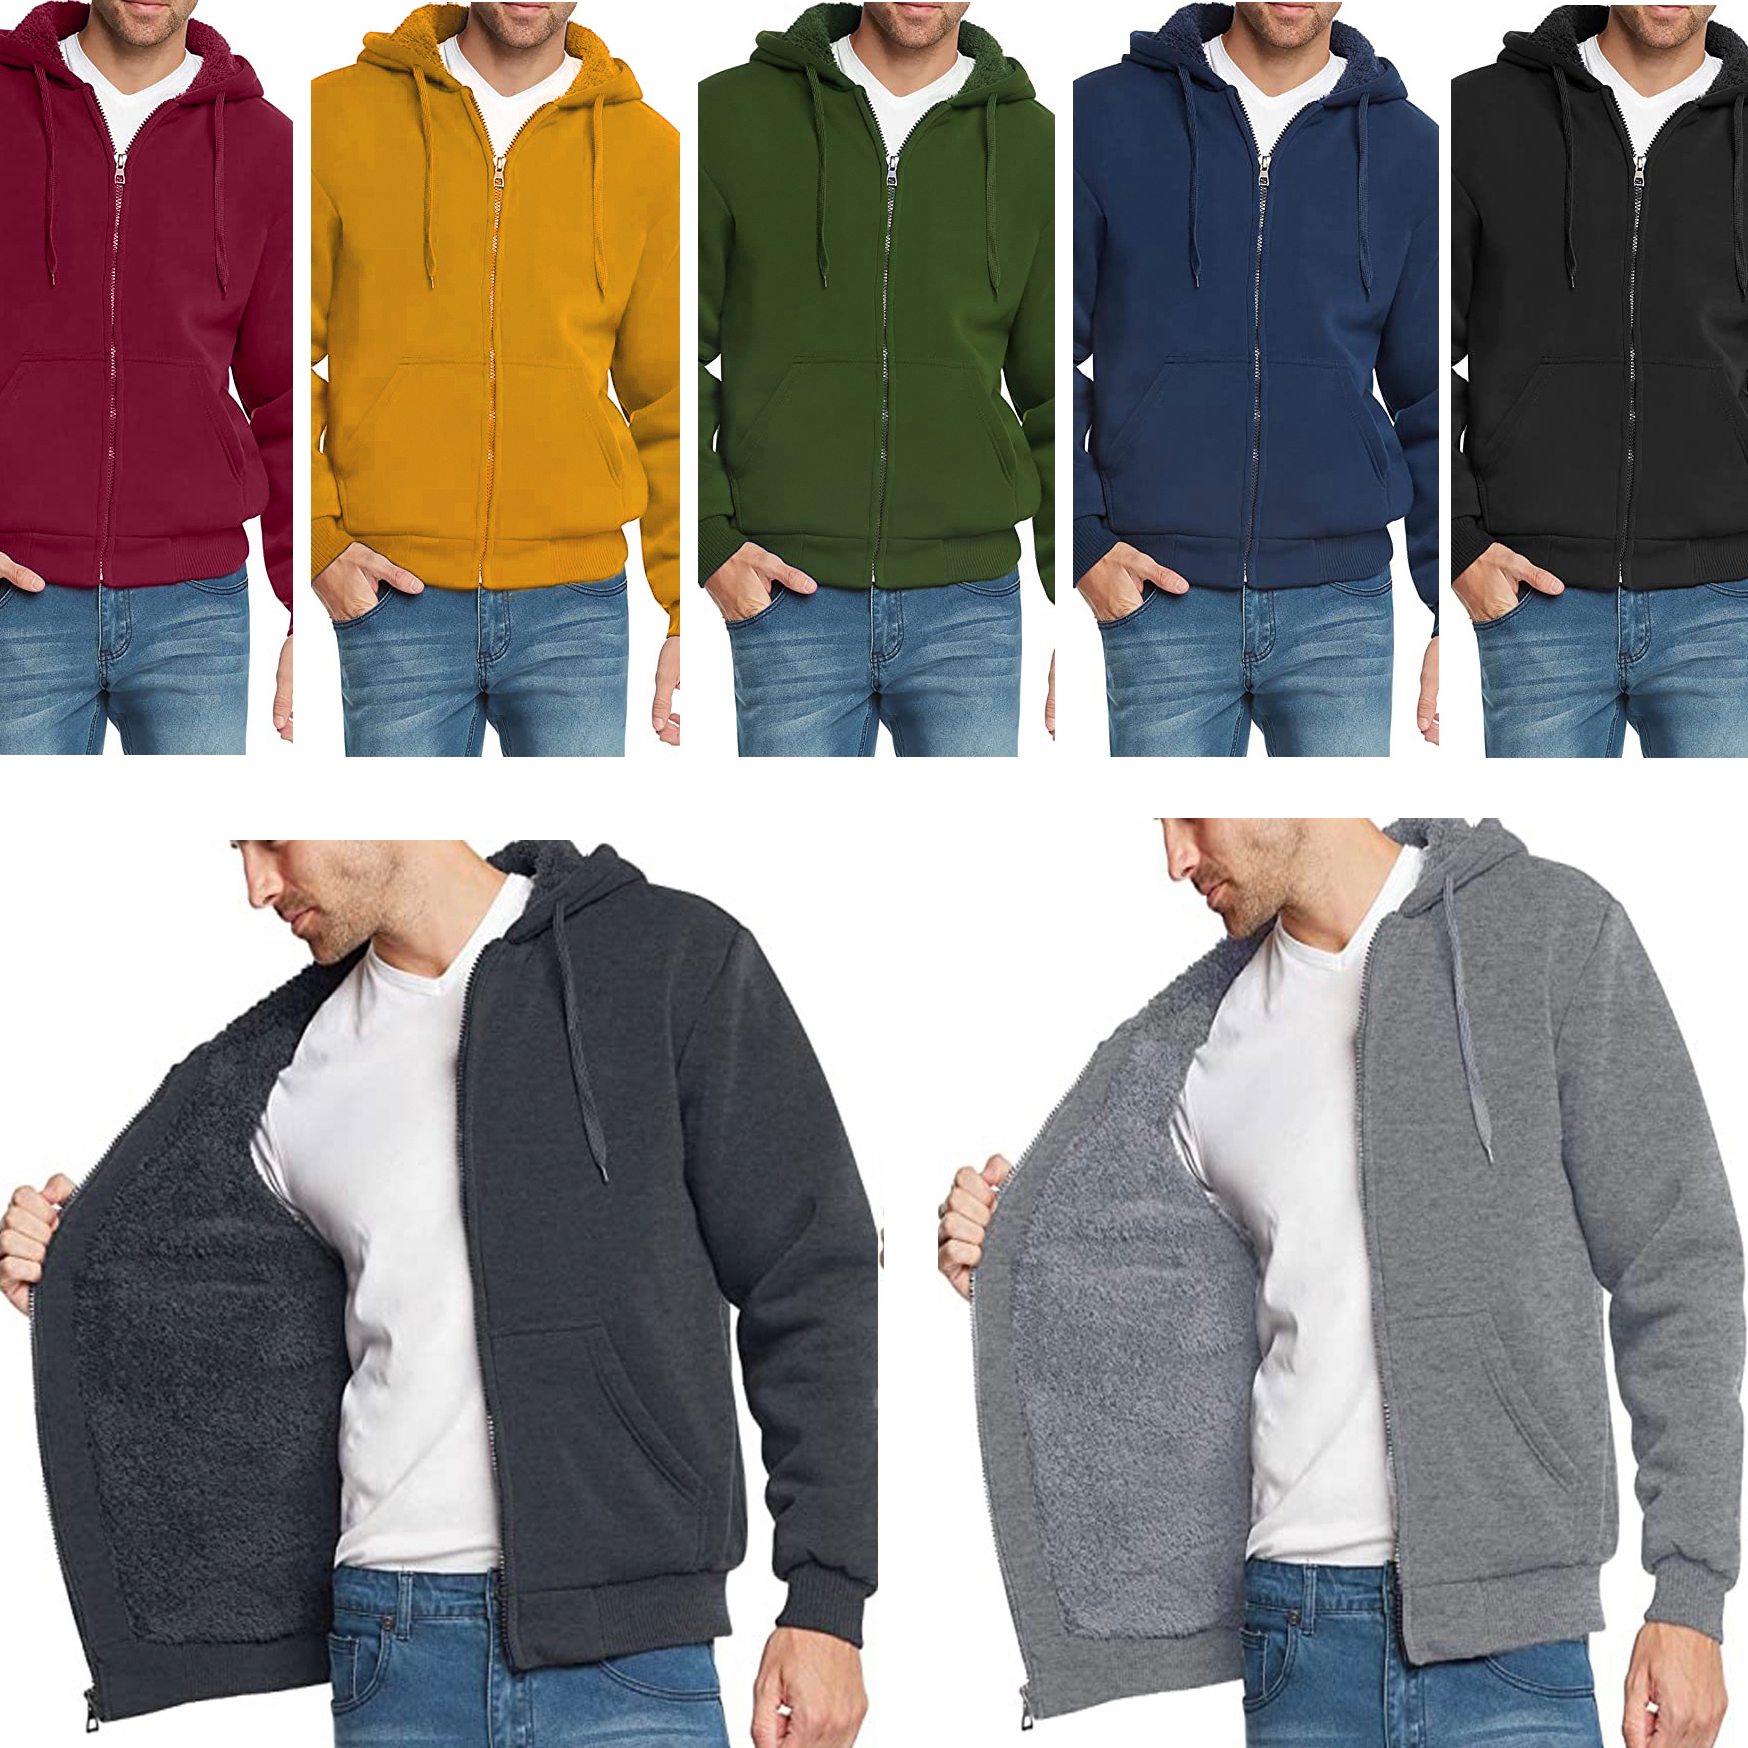 Men's Extra-Thick Sherpa Lined Fleece Hoodie (Big & Tall Sizes Available) - Olive, X-Large